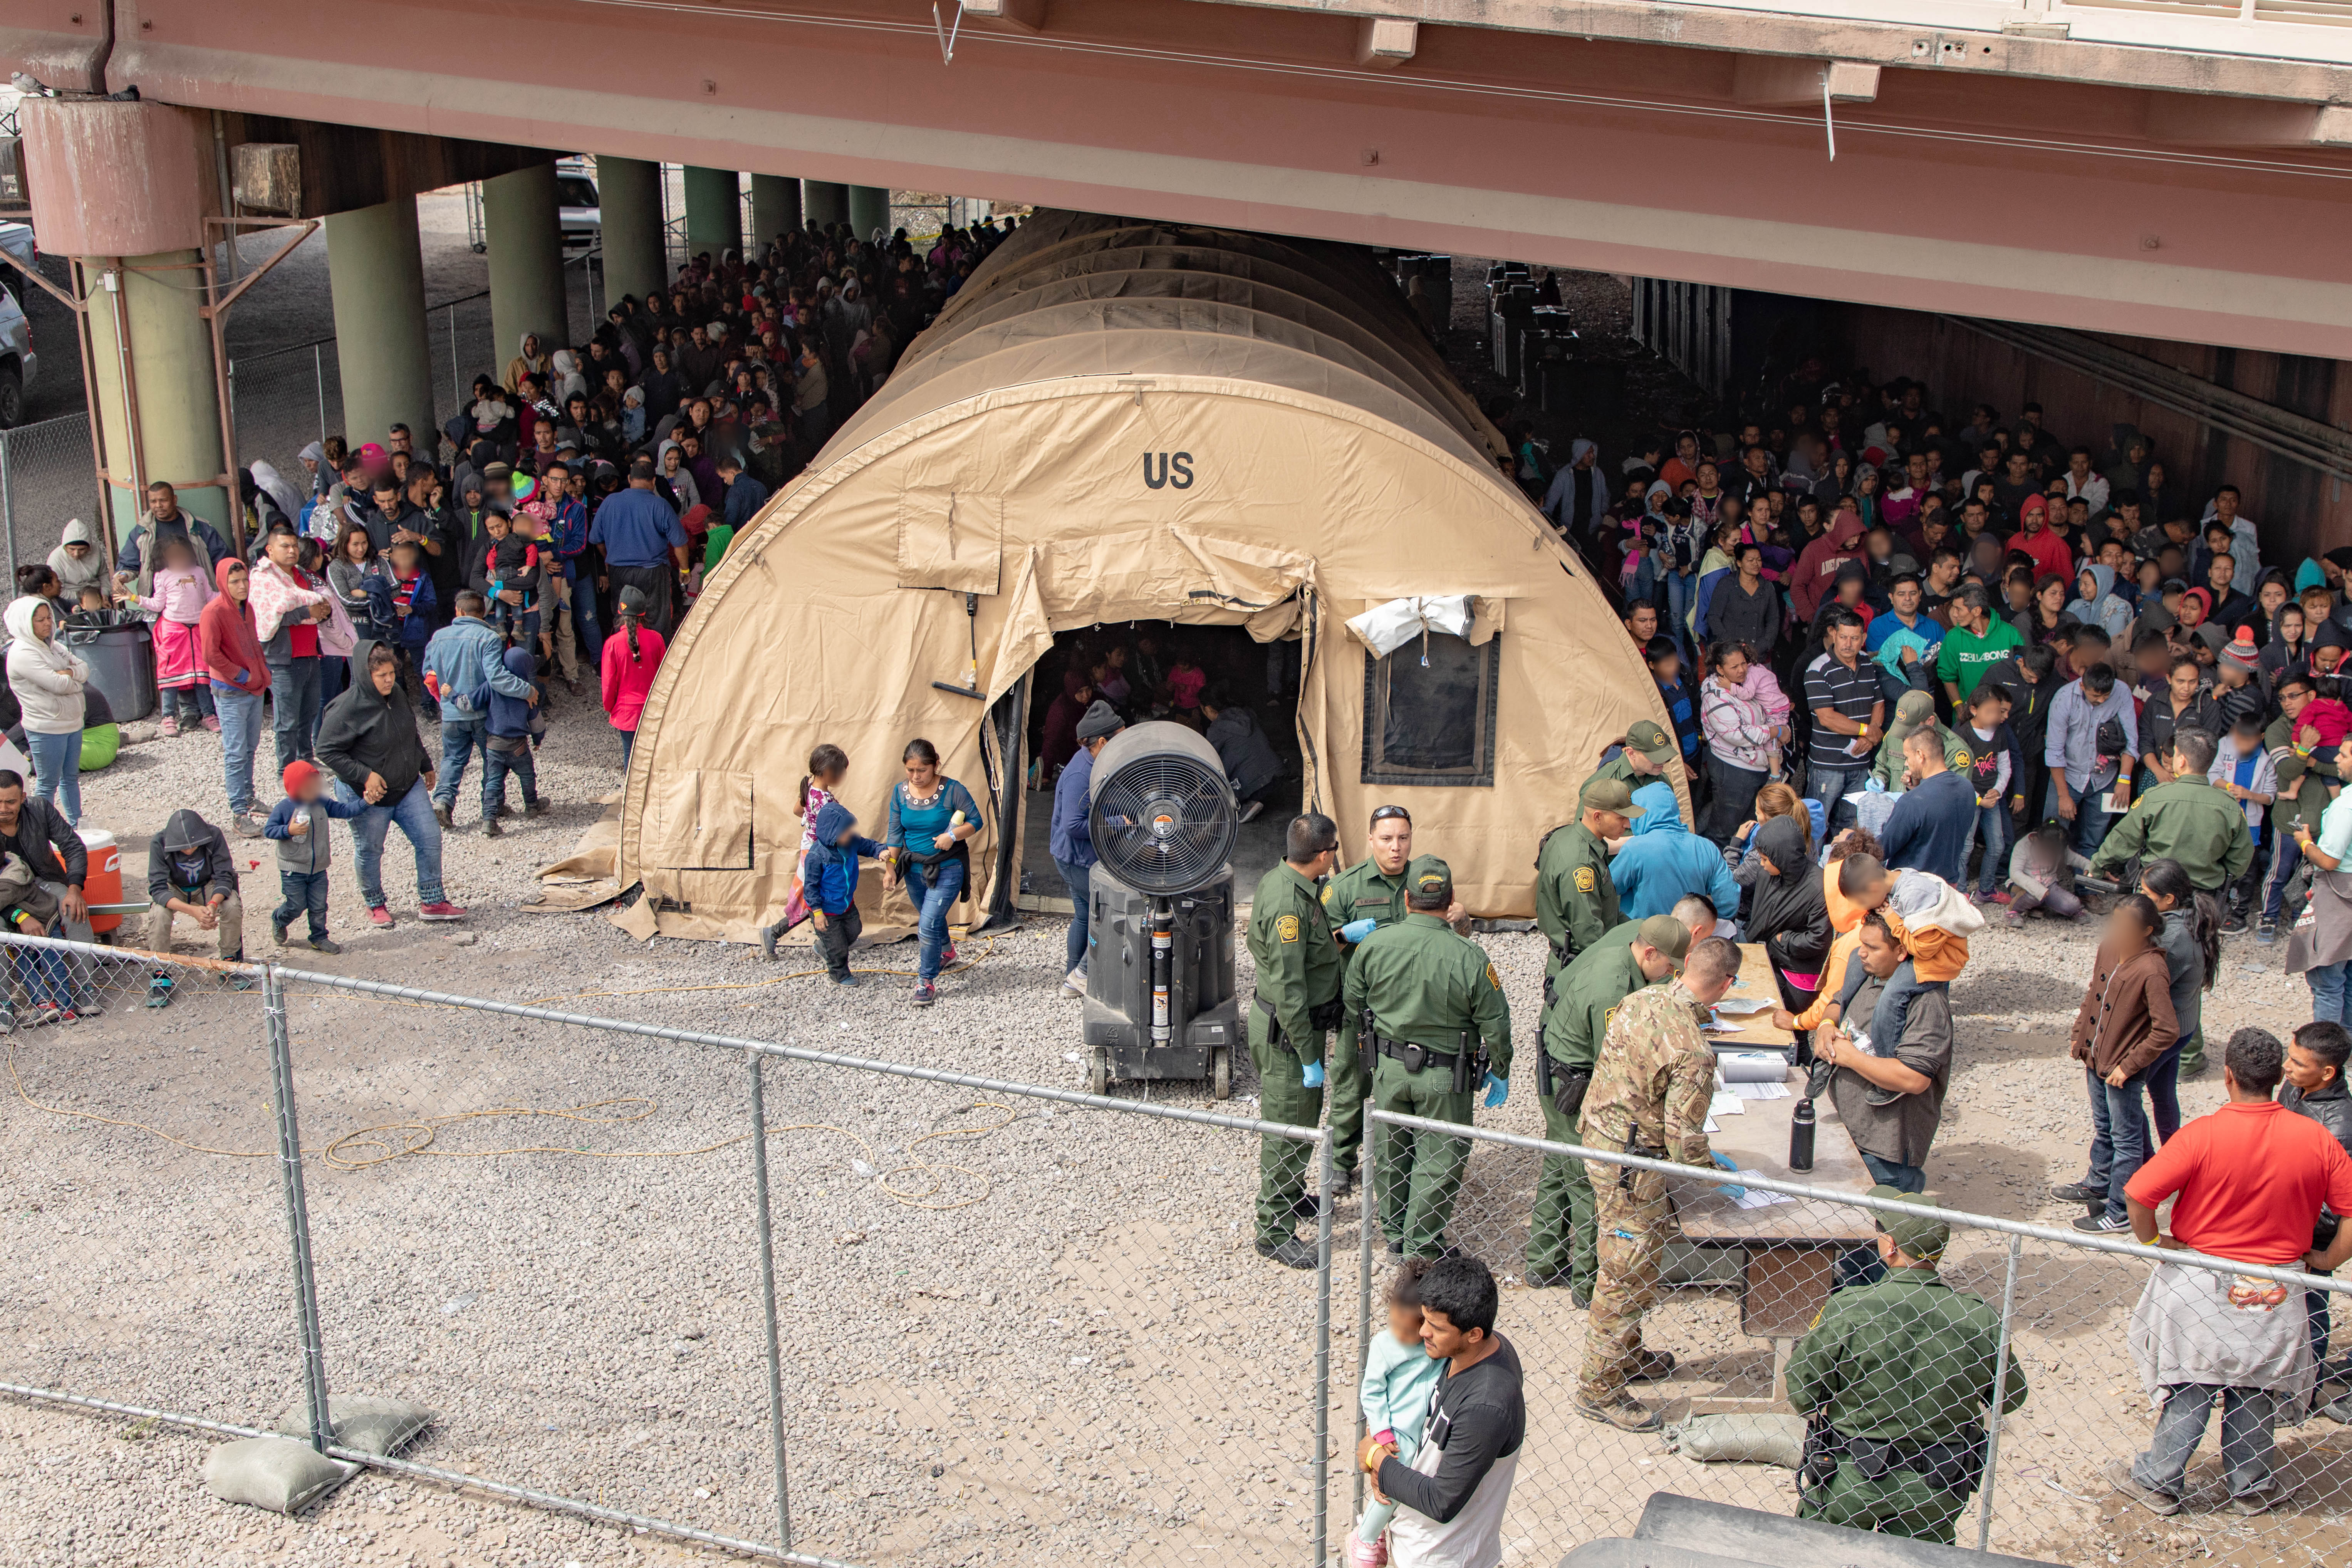 U.S. Border Patrol agents provide food, water and medical screening to scores of migrants at a processing center after crossing the international border between the United States and Mexico on March 22, 2019 in El Paso, Texas. (Mani Albrecht/U.S. Customs and Border Protection via Getty Images)